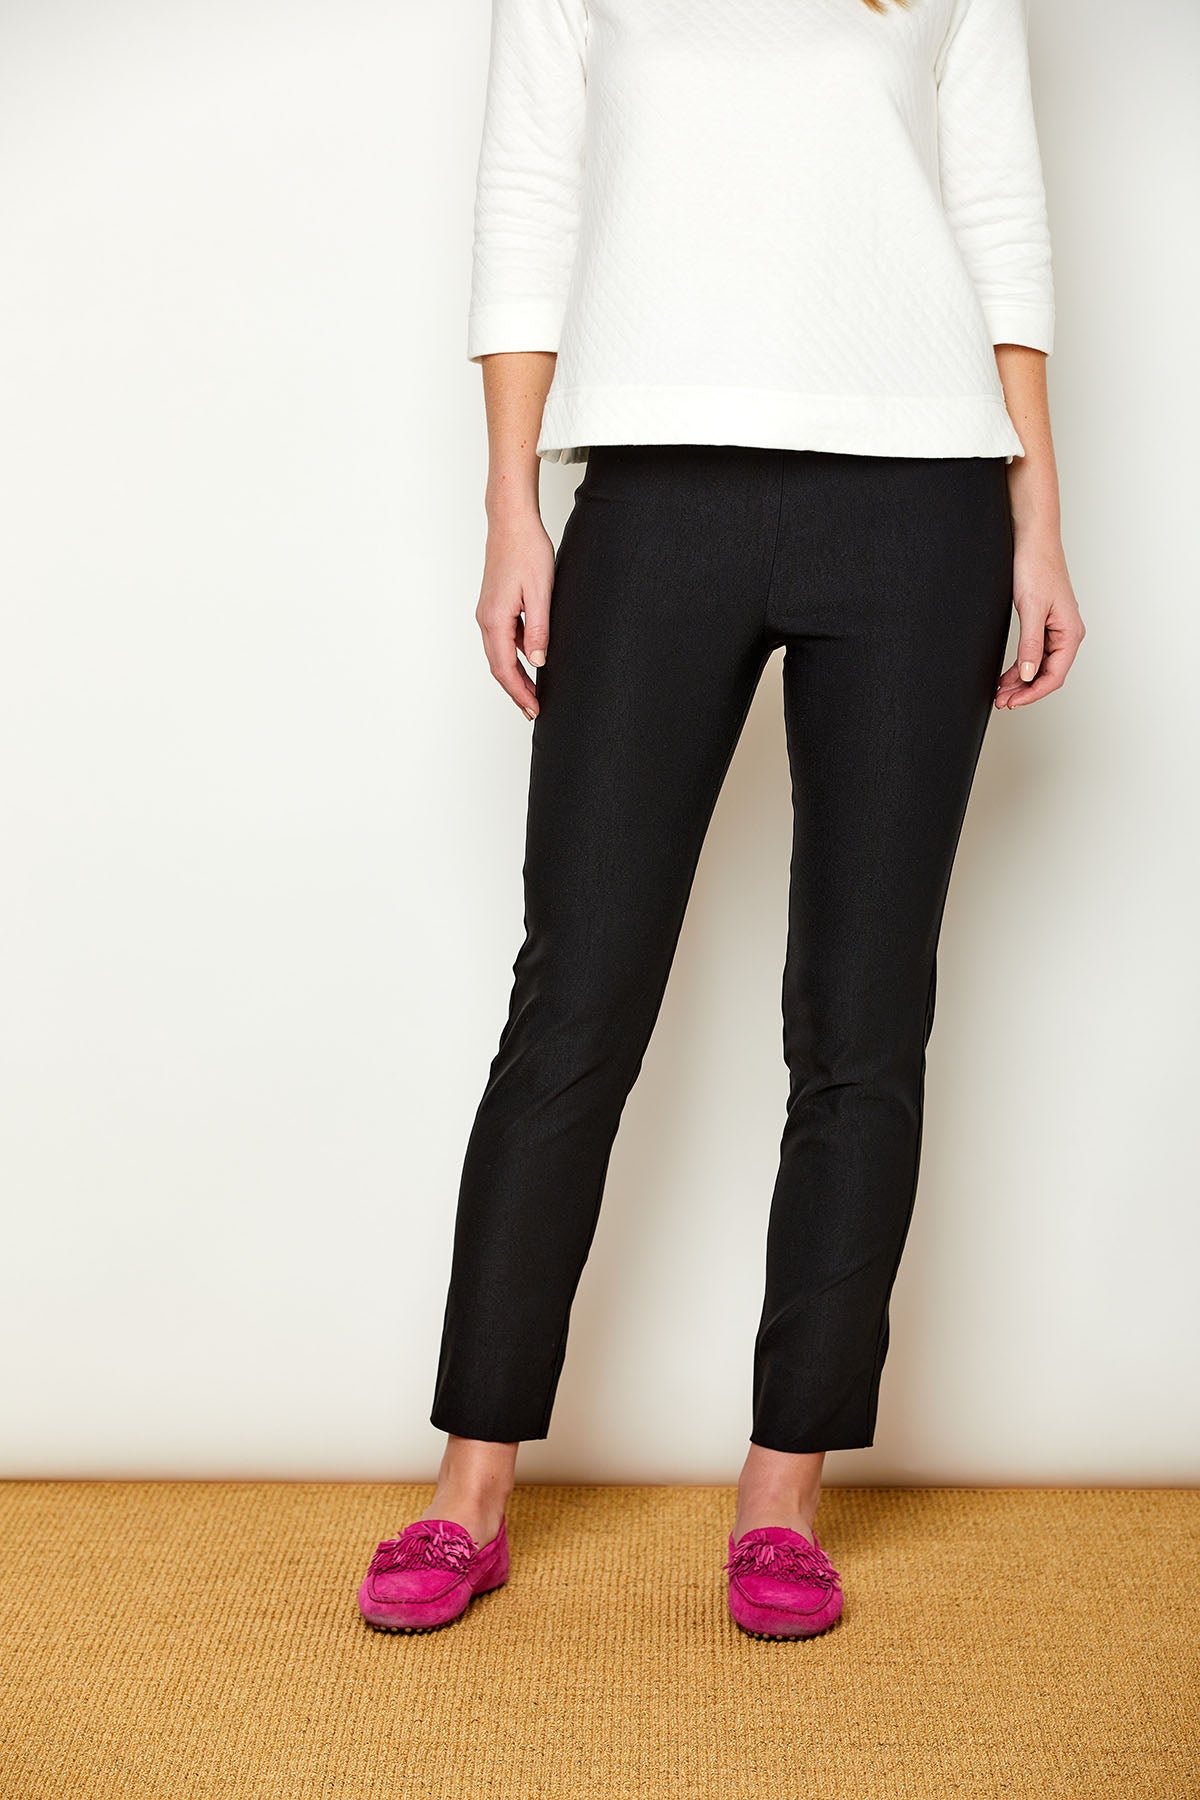 The best-selling Sara Campbell Sheri Pants in black